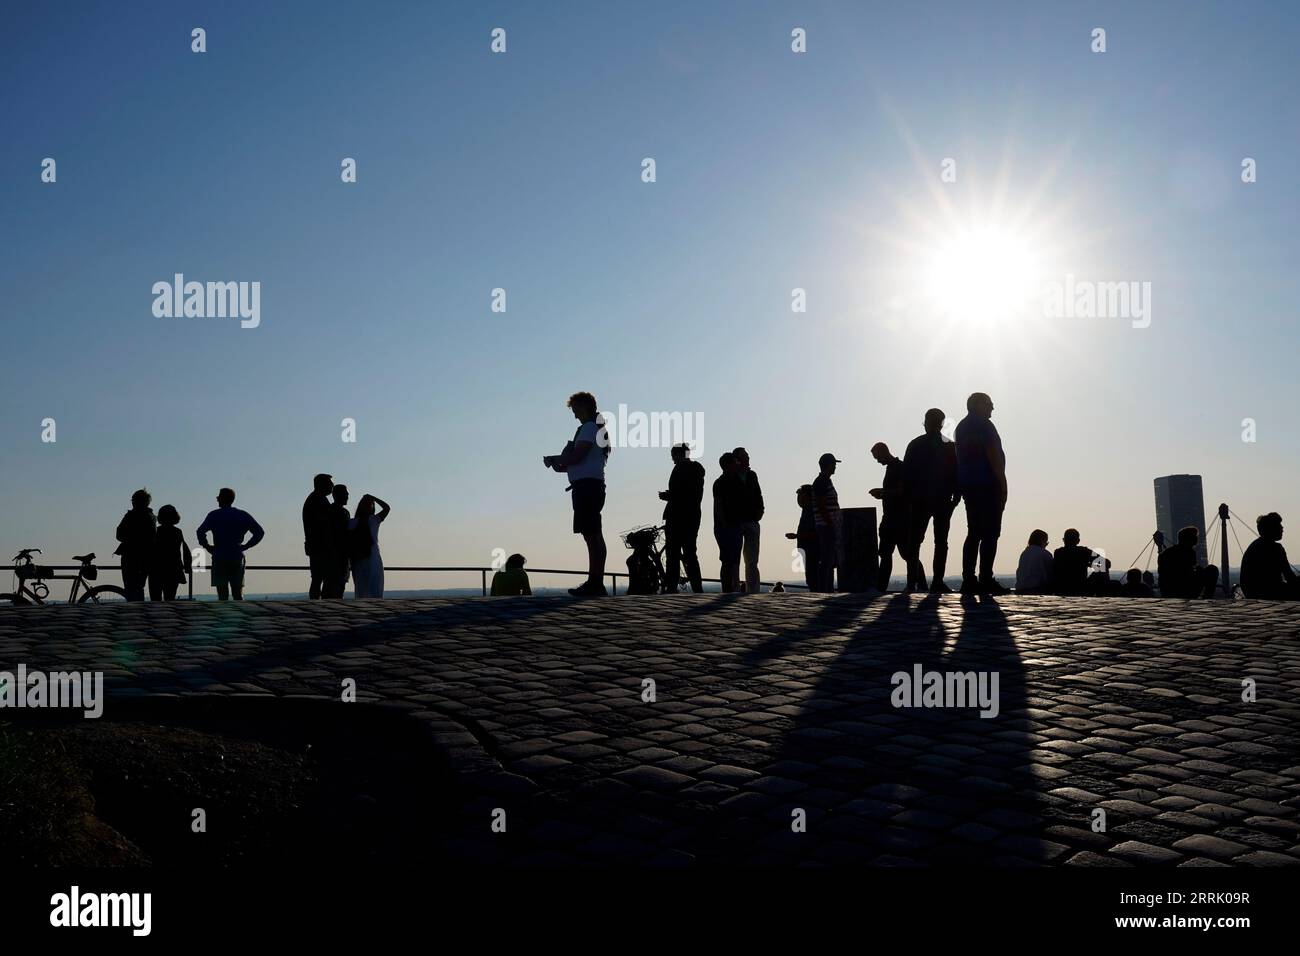 Germany, Bavaria, Munich, Olympic center, Olympiaberg, evening sun, group of people, silhouette Stock Photo